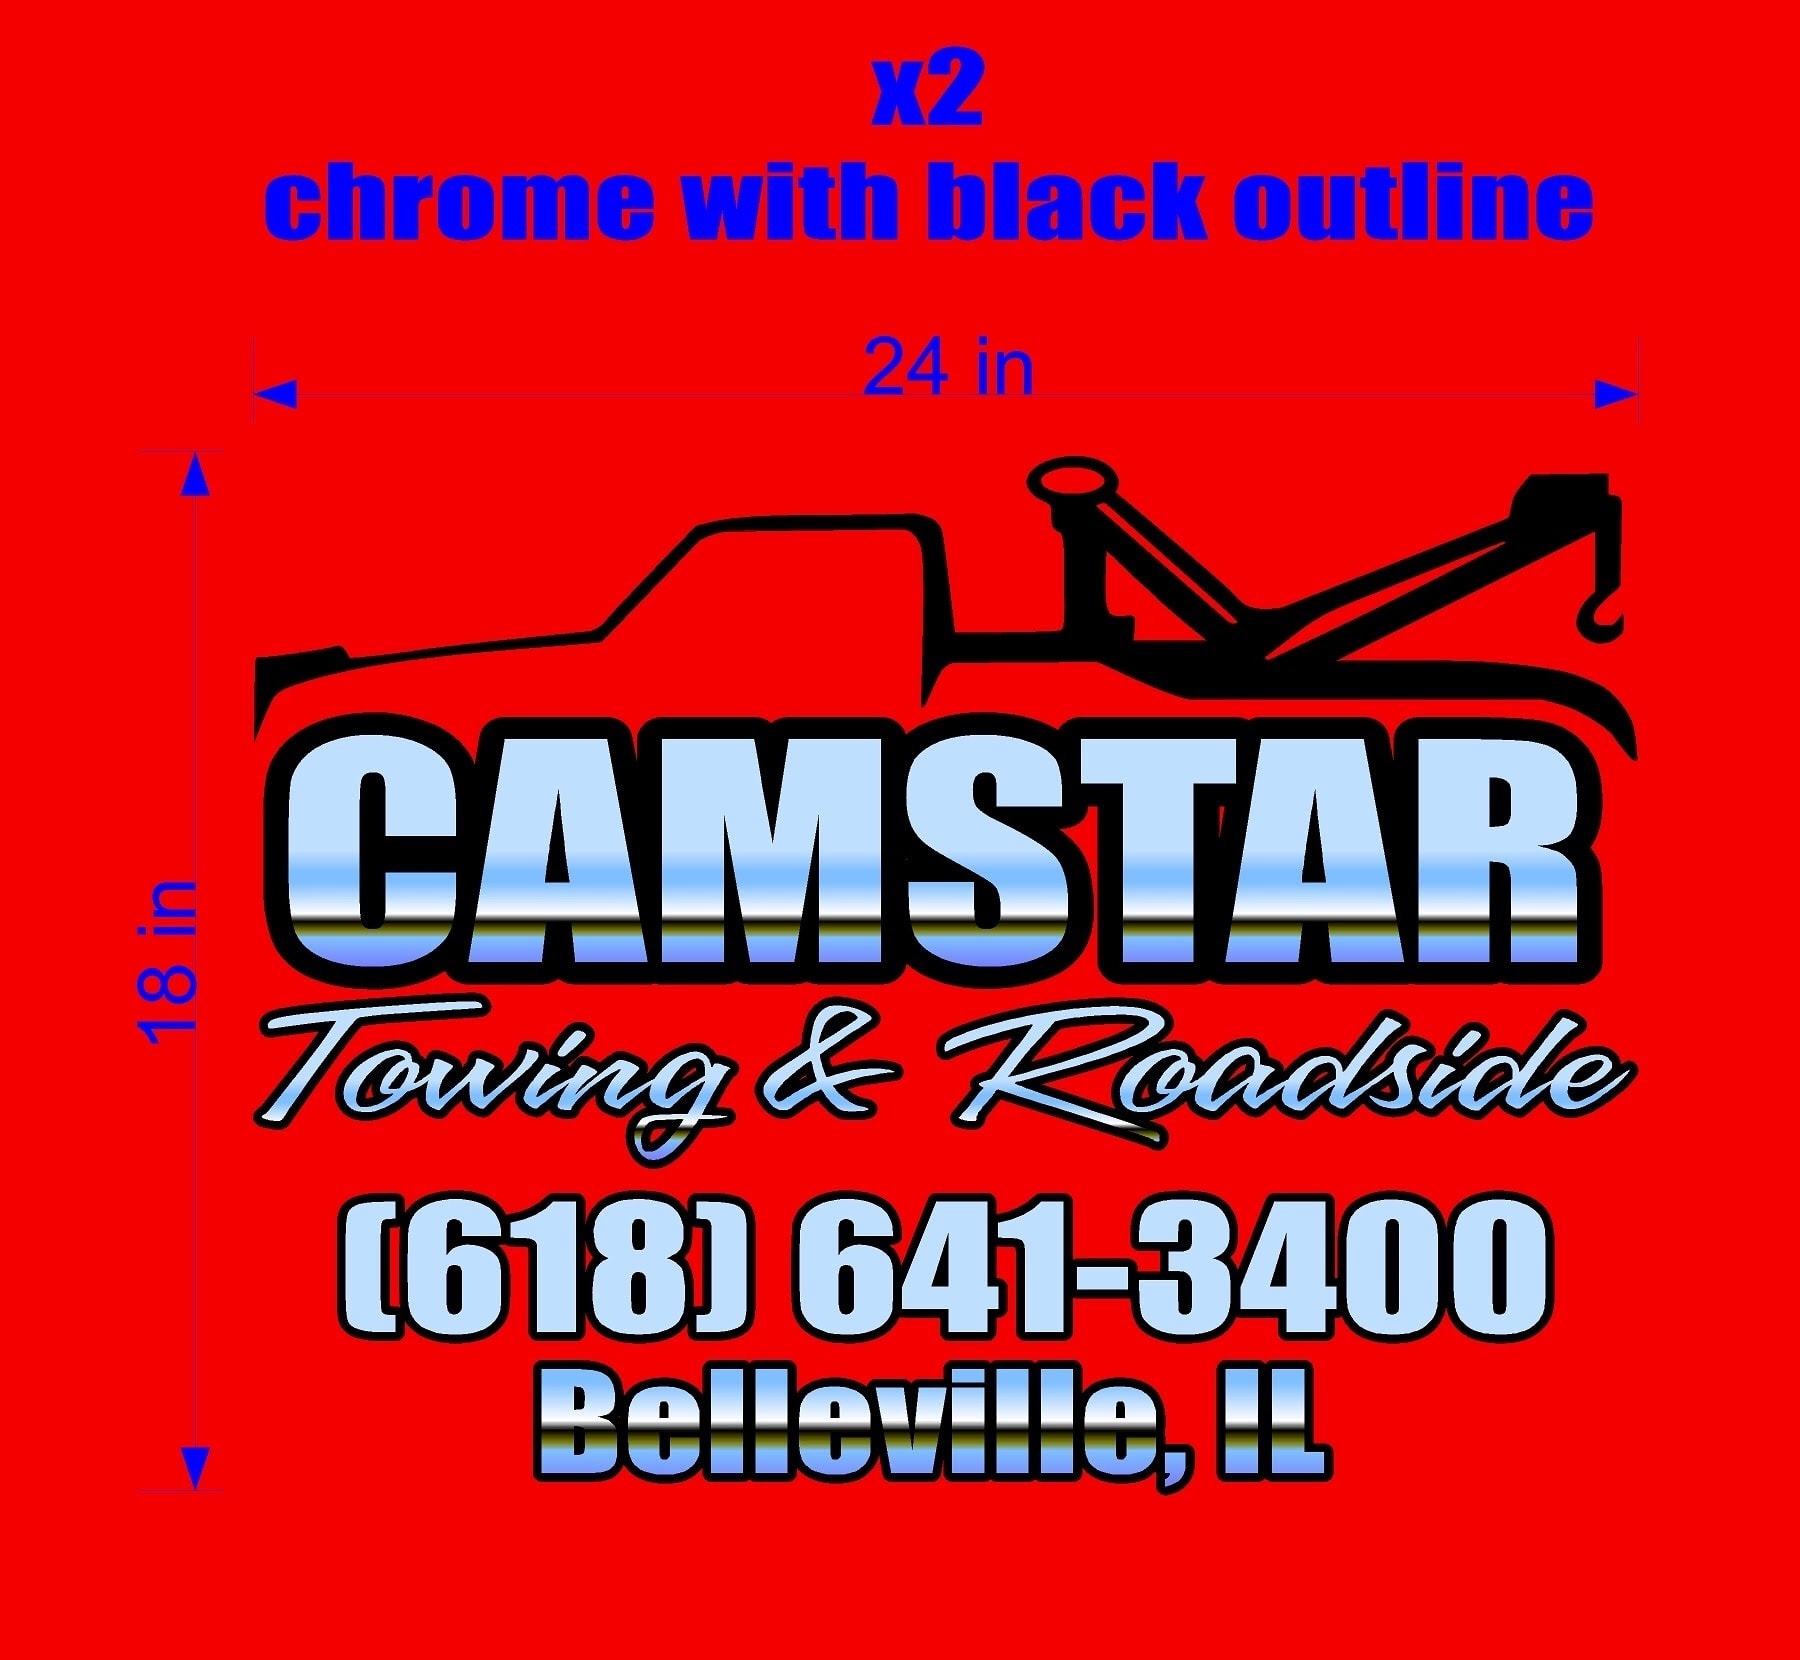 Cam Star Towing